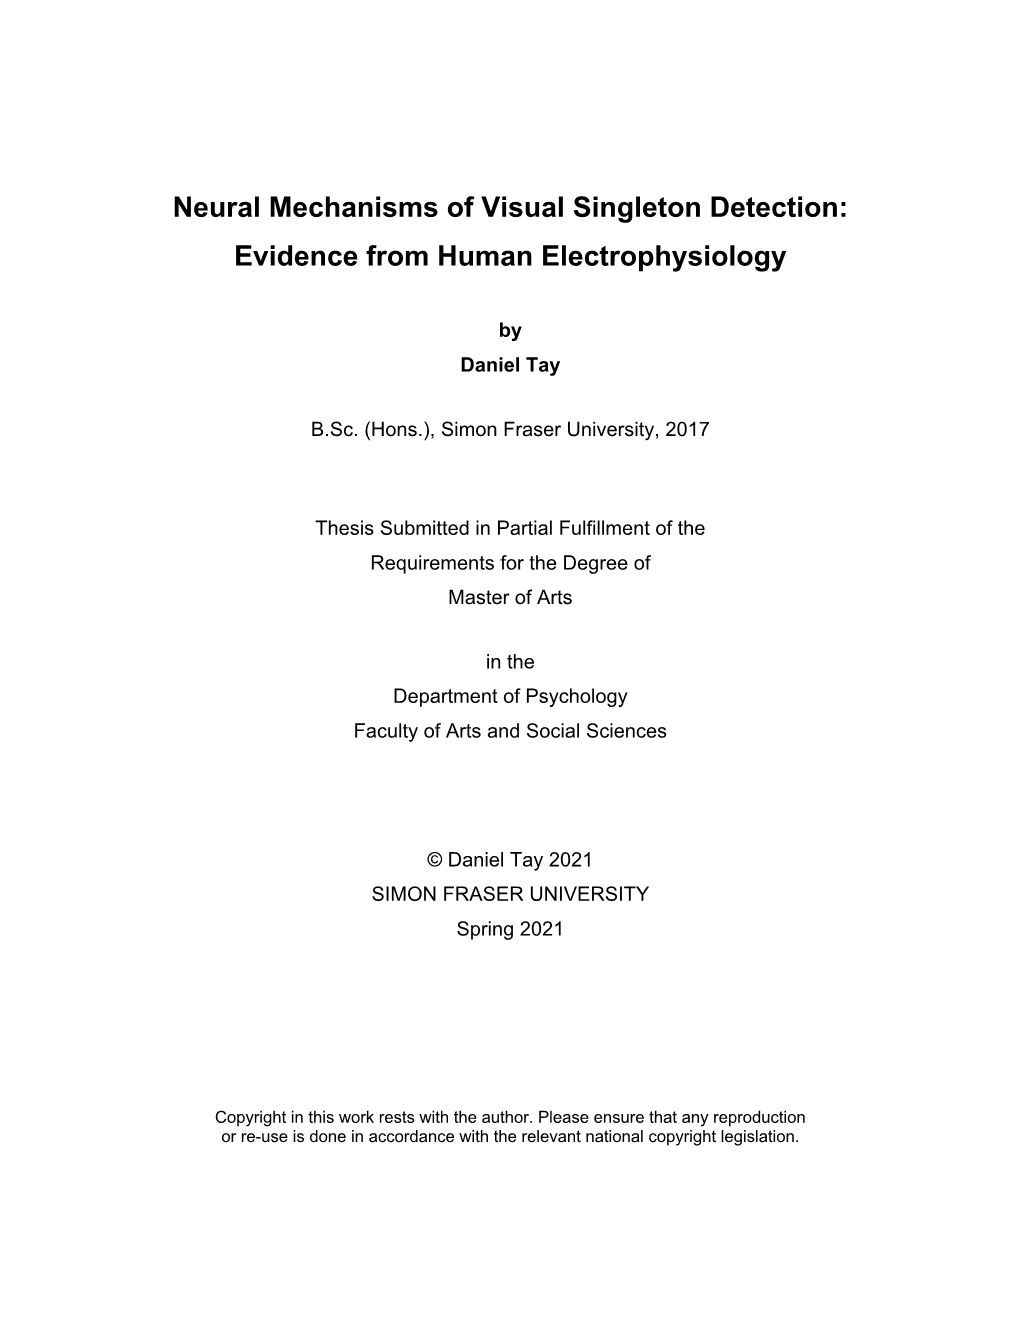 Neural Mechanisms of Visual Singleton Detection: Evidence from Human Electrophysiology